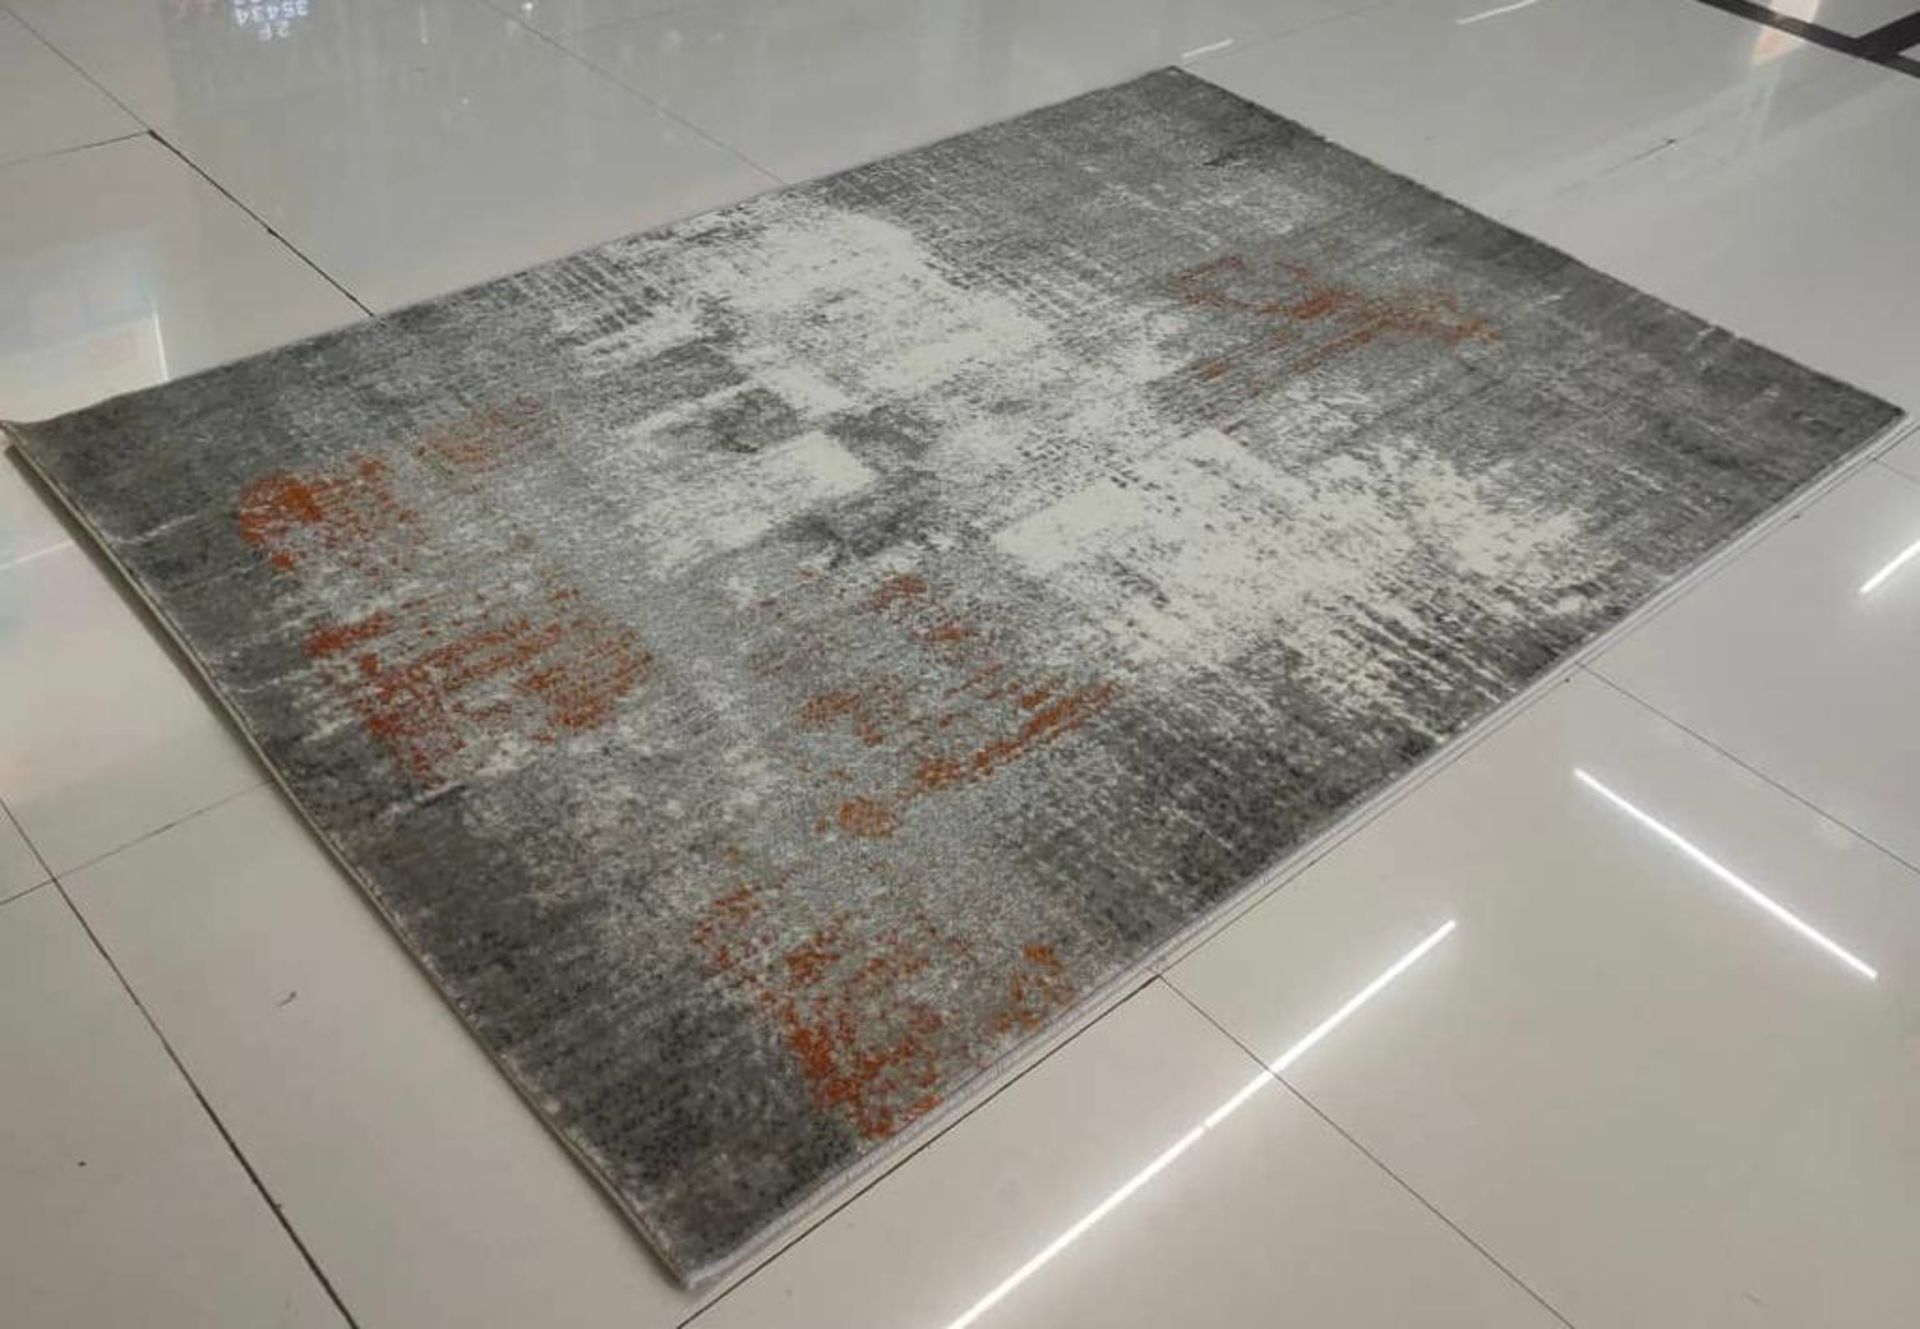 NEW HUGE 2.3M ABSTRACT GREY AND COPPER PATTERNED RUG